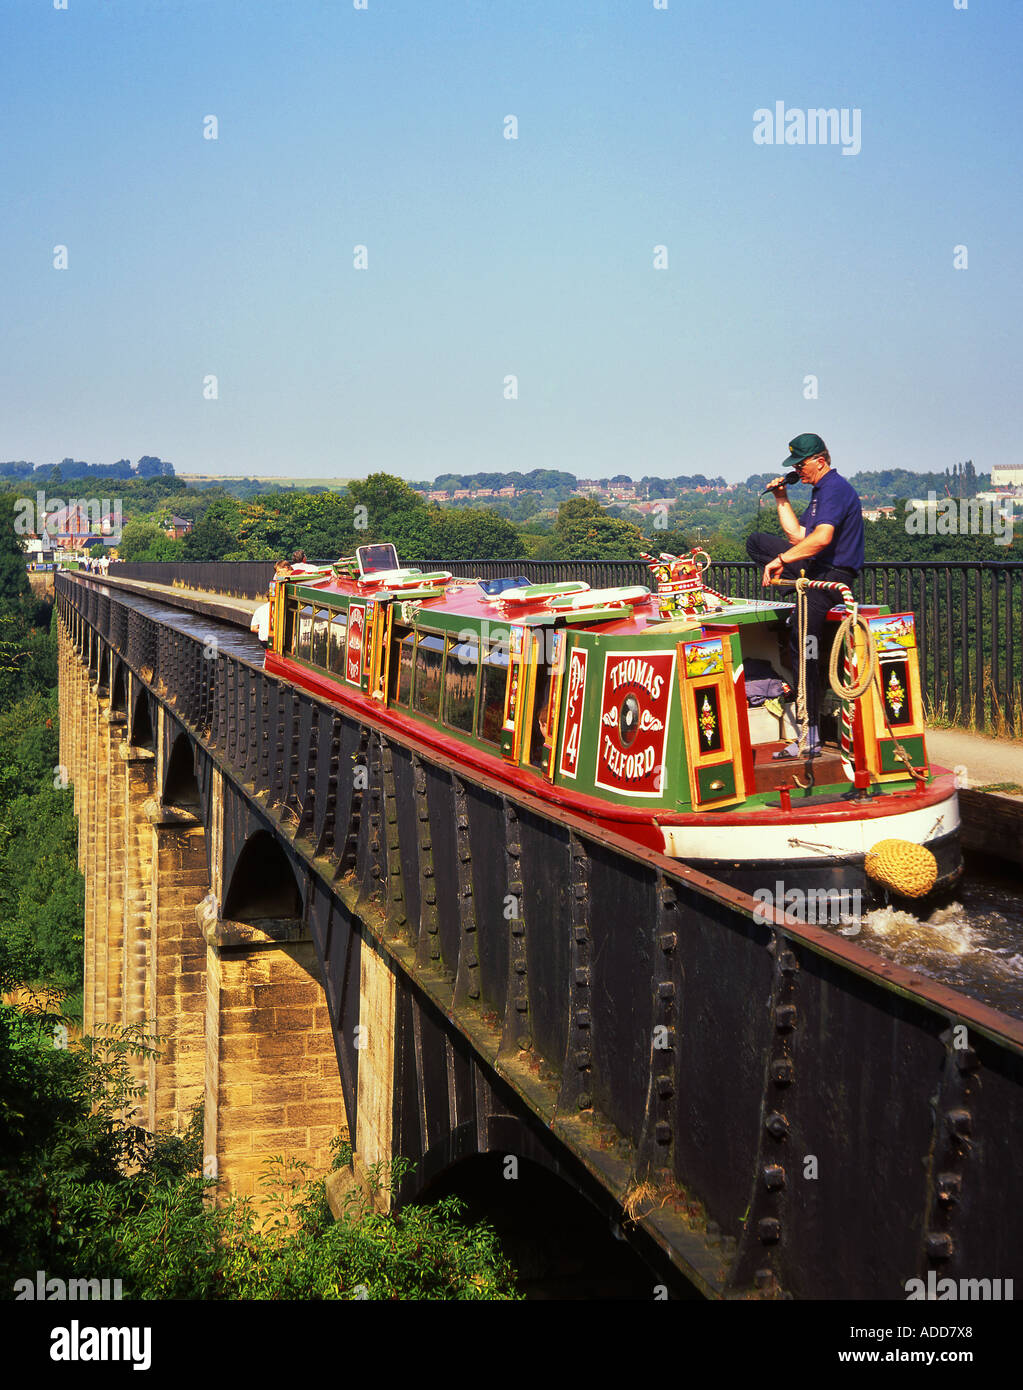 Traditional Narrowboat Crossing the Pontcysyllte Aqueduct on Shropshire Union Canal, Near Trevor, Vale of Llangollen, Wales, UK Stock Photo